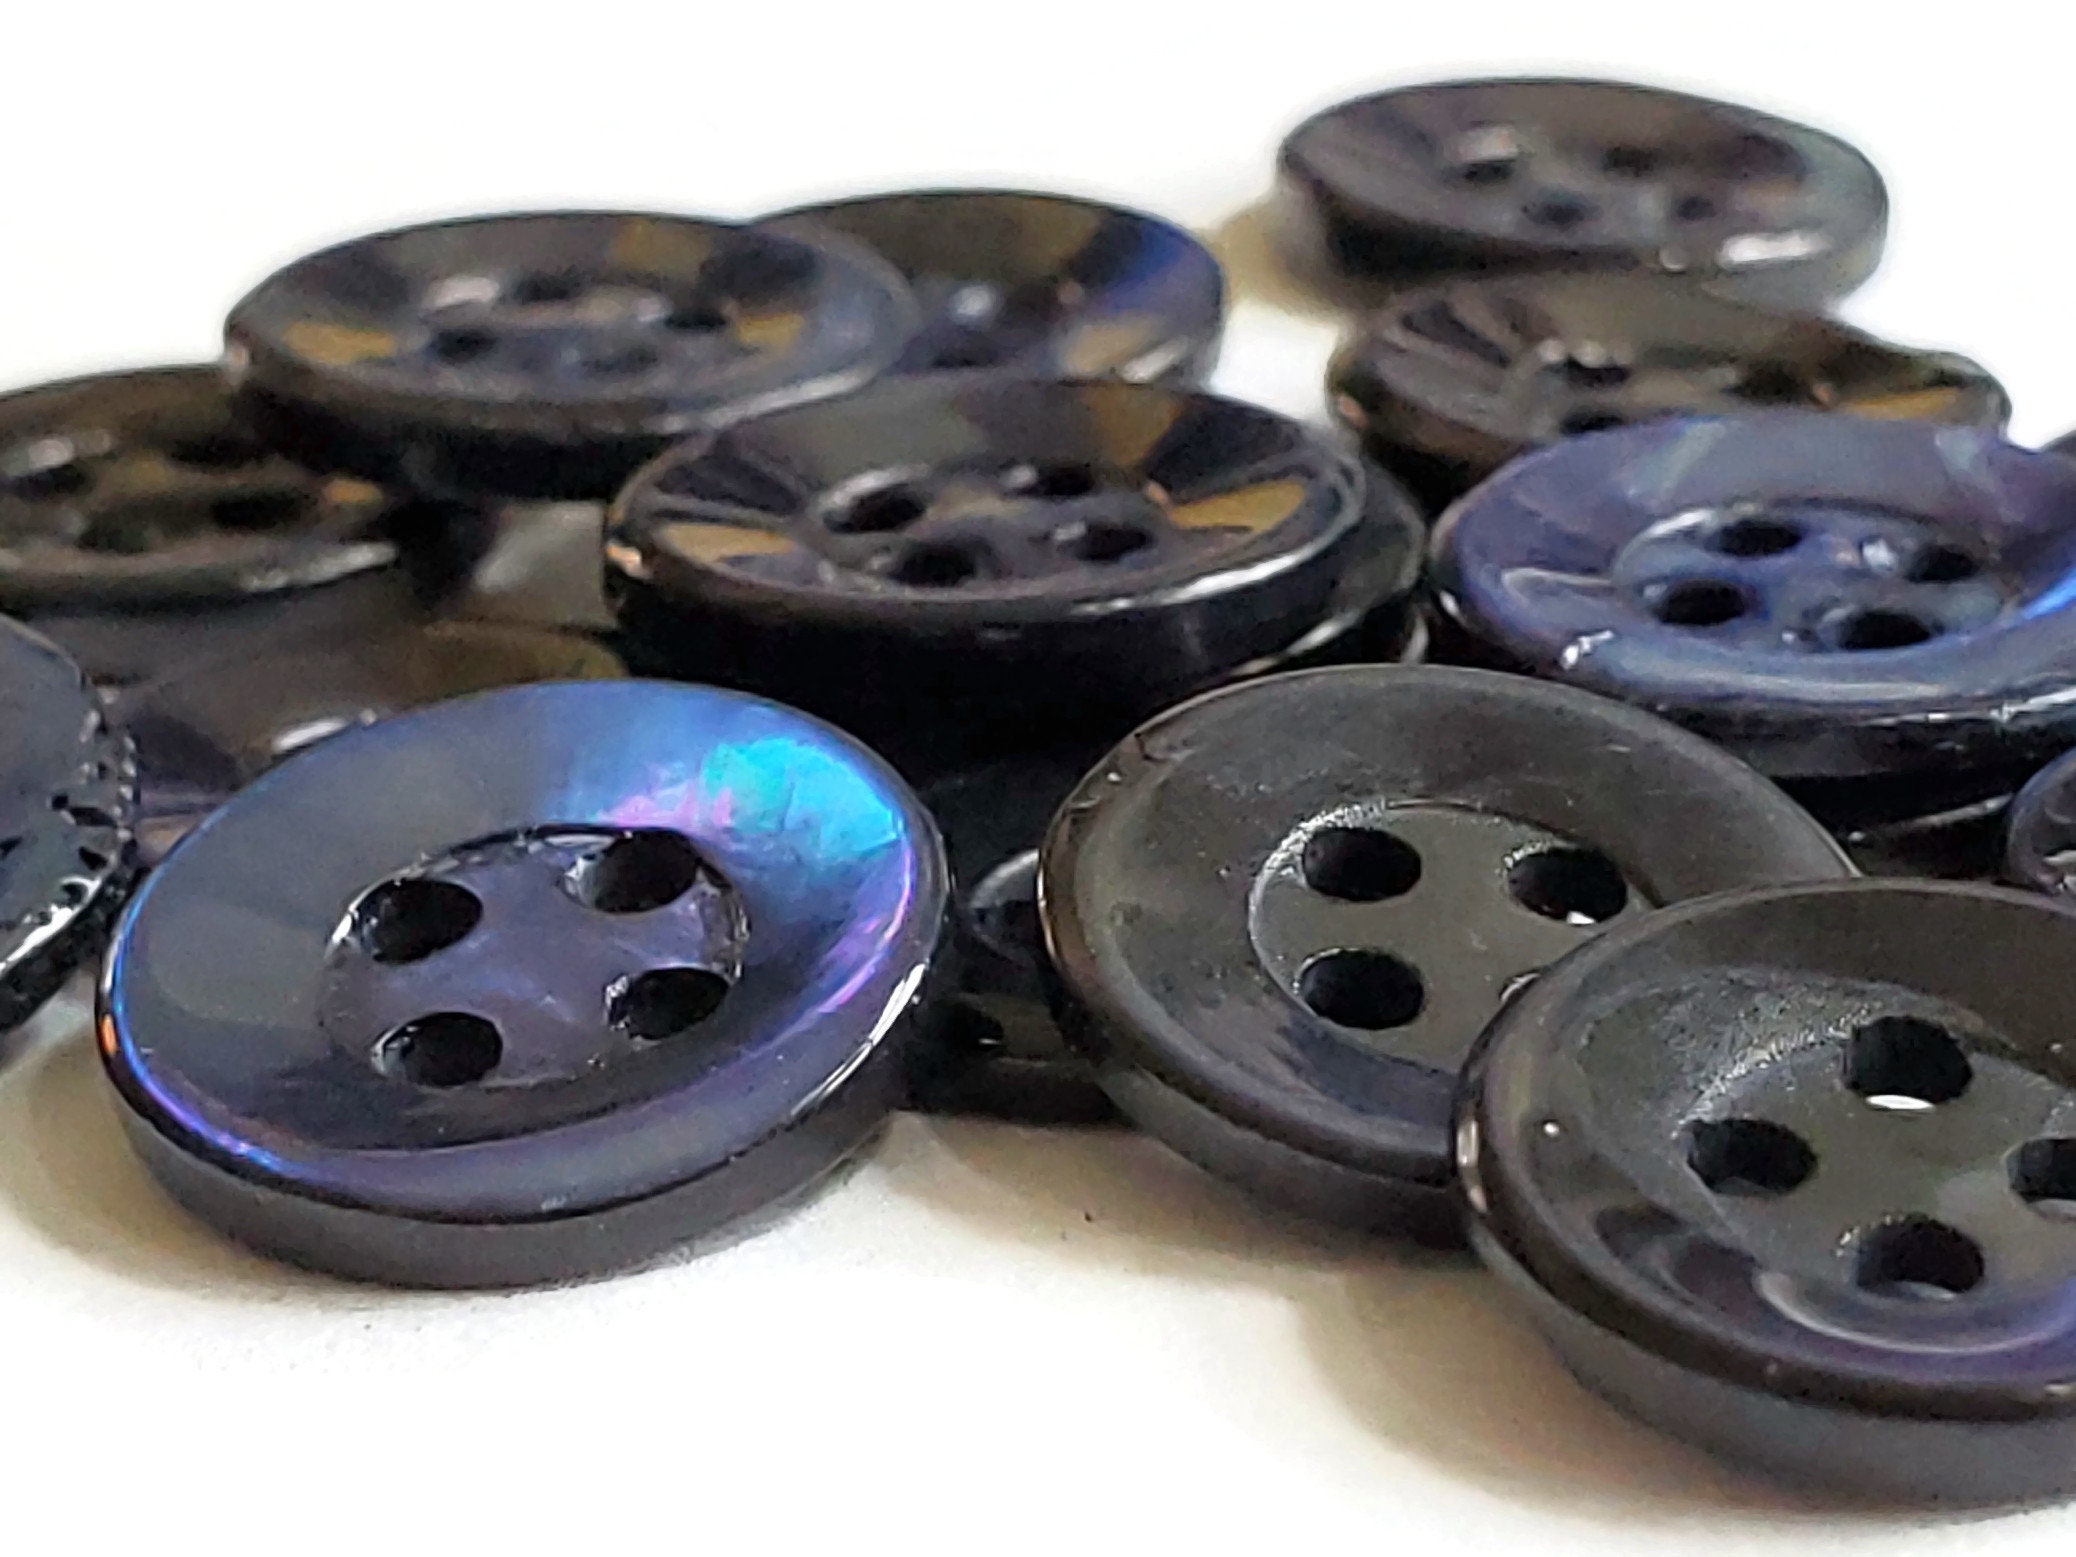 3/4 Shine On  Plastic Buttons